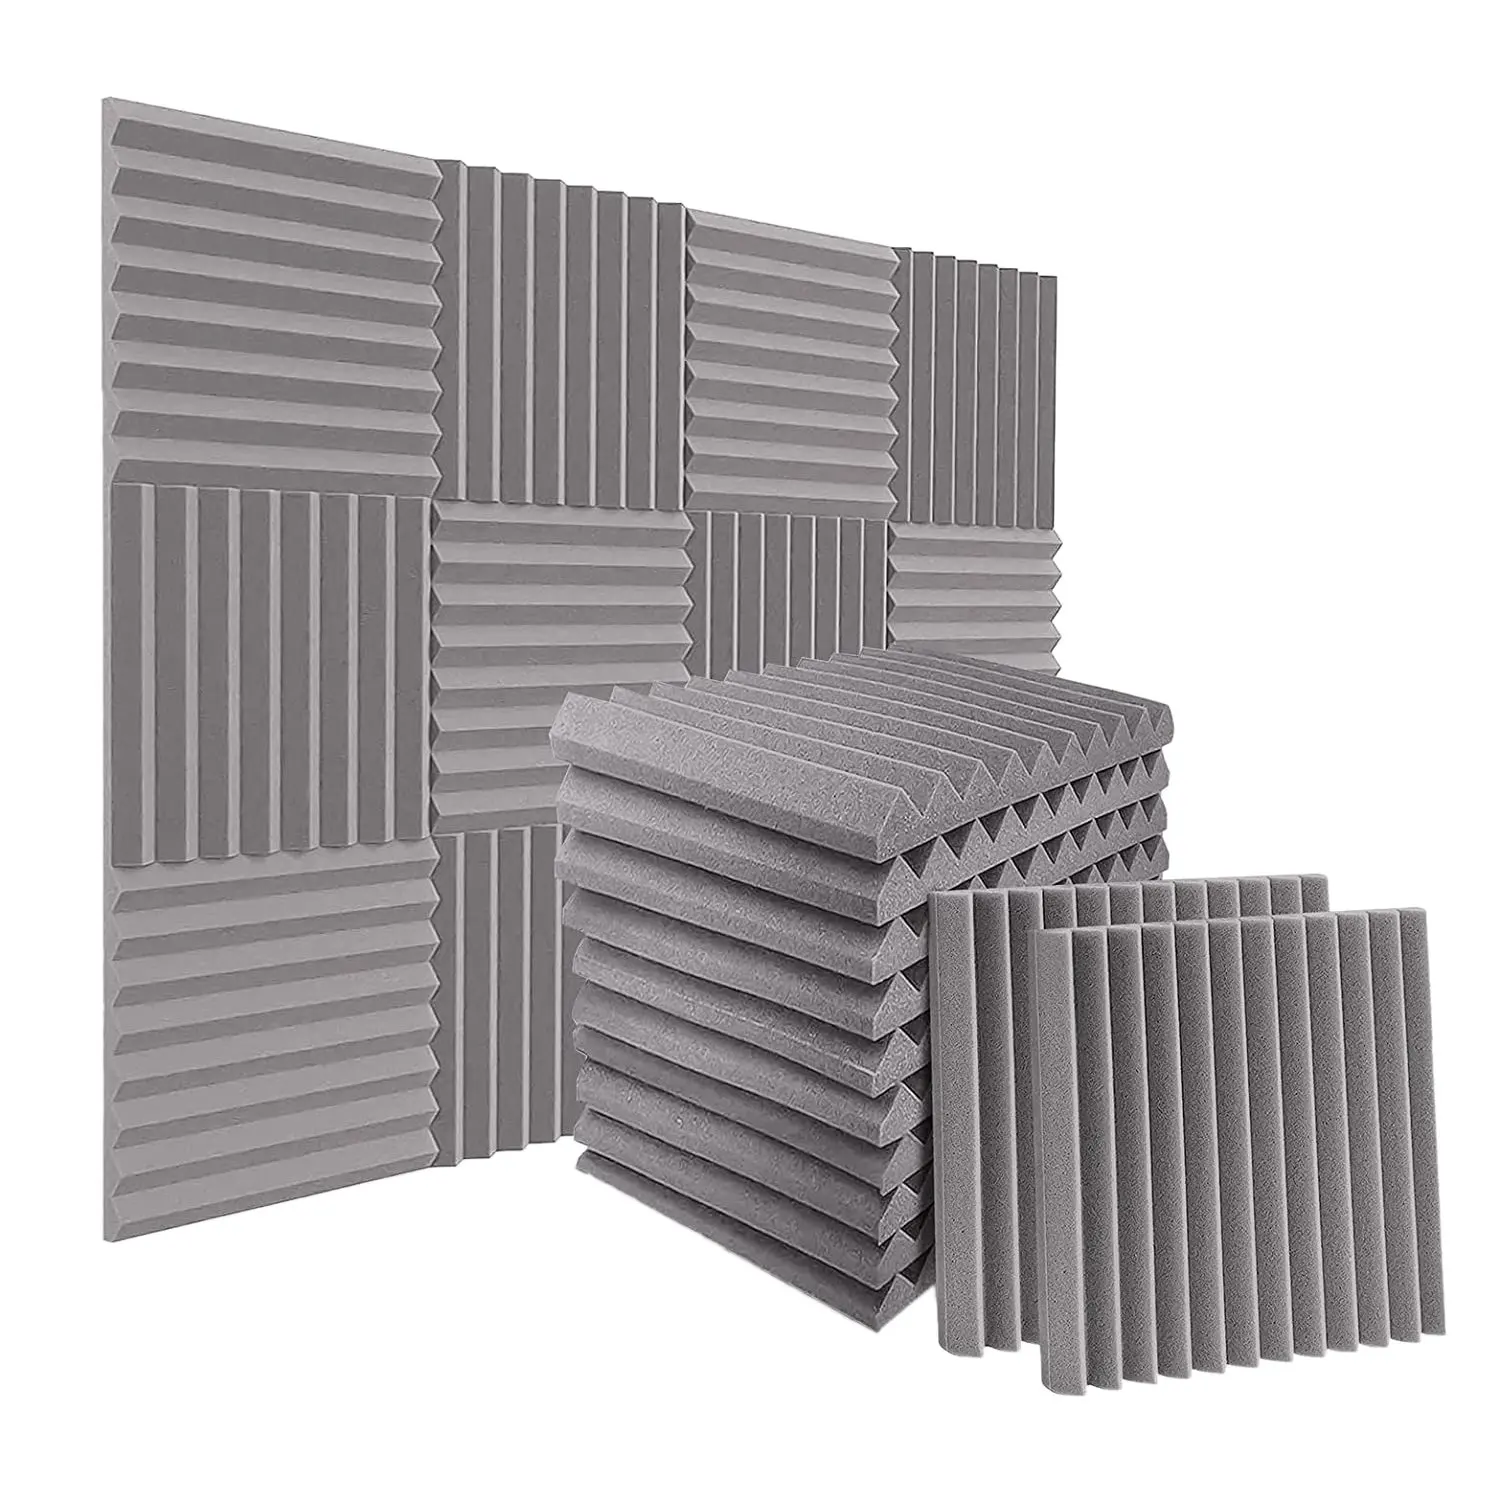 

24Pack 1 Inch X 12 Inch X12 Inch Soundproof Foam Panels Sound Absorbing Insulation for Recording Studio, Gaming Room